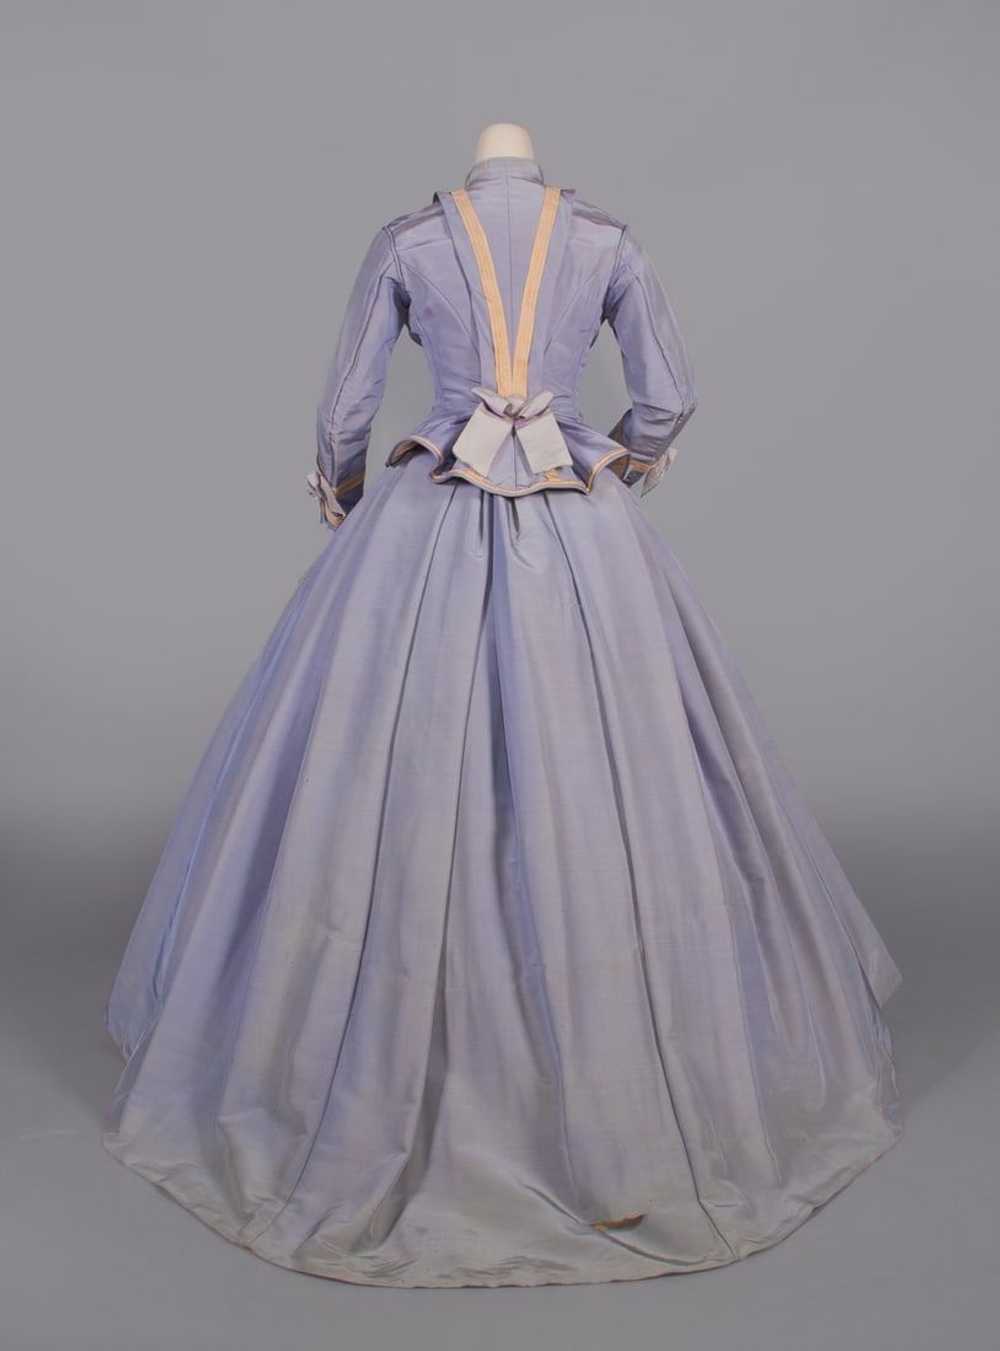 PERIWINKLE SILK FAILLE DAY DRESS, c. 1867 - image 4